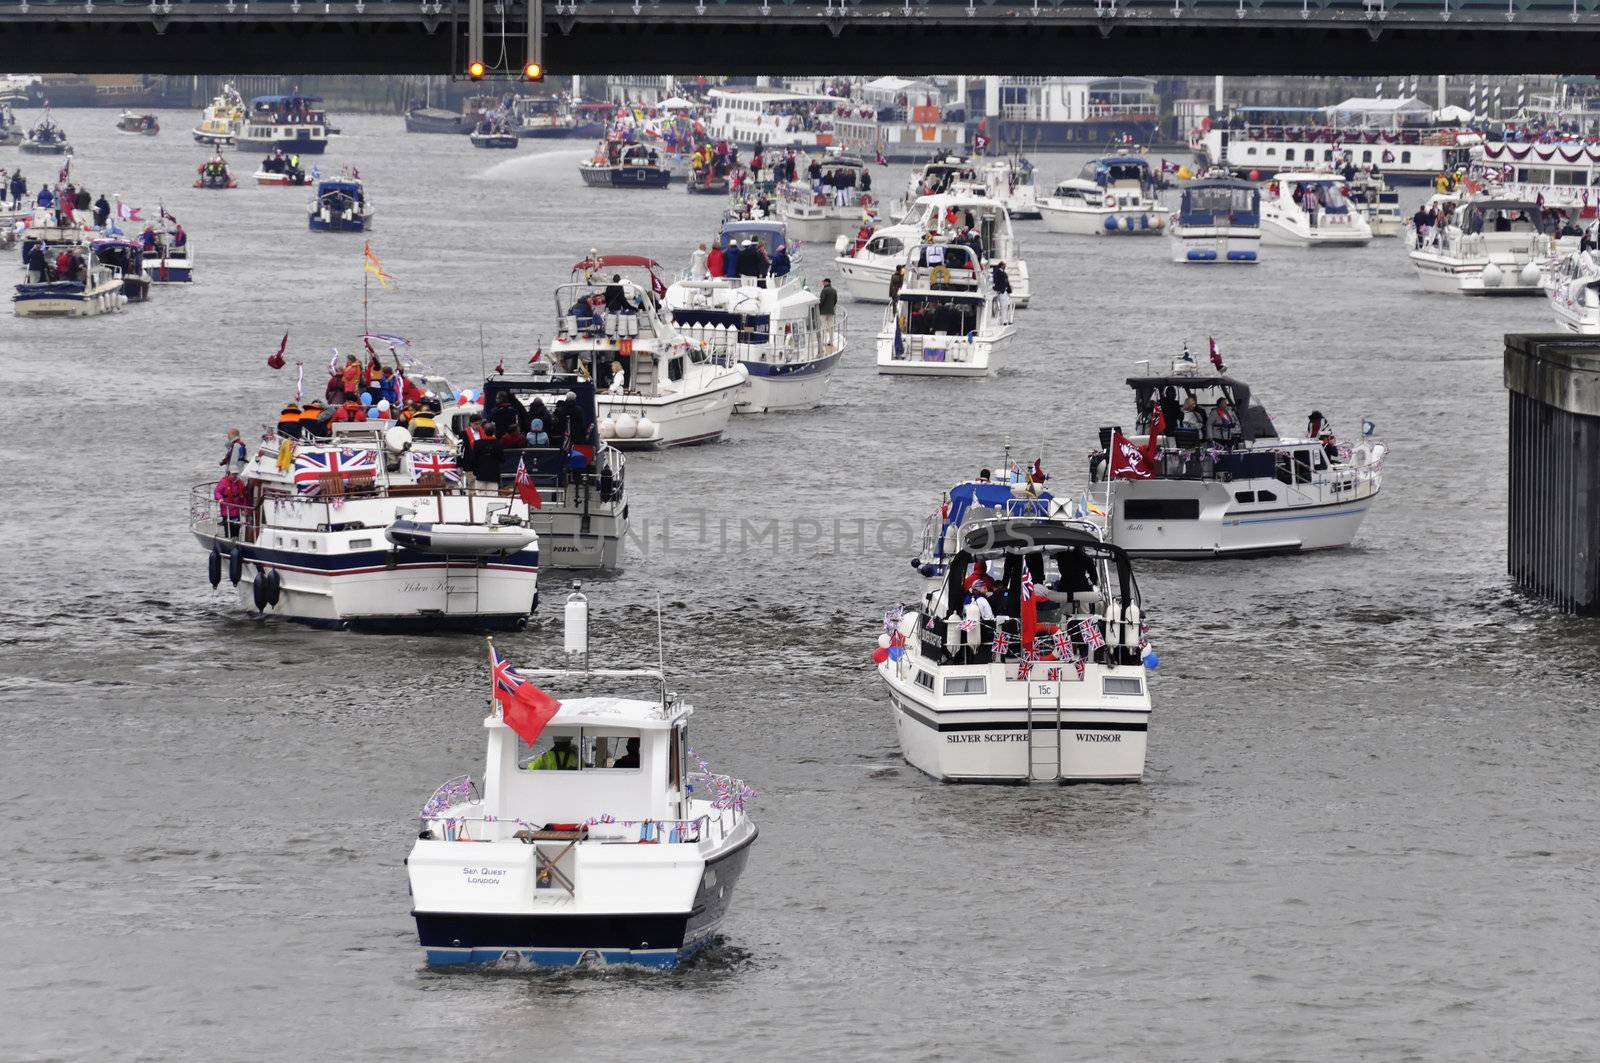 The Thames Diamond Jubilee Pageant by dutourdumonde